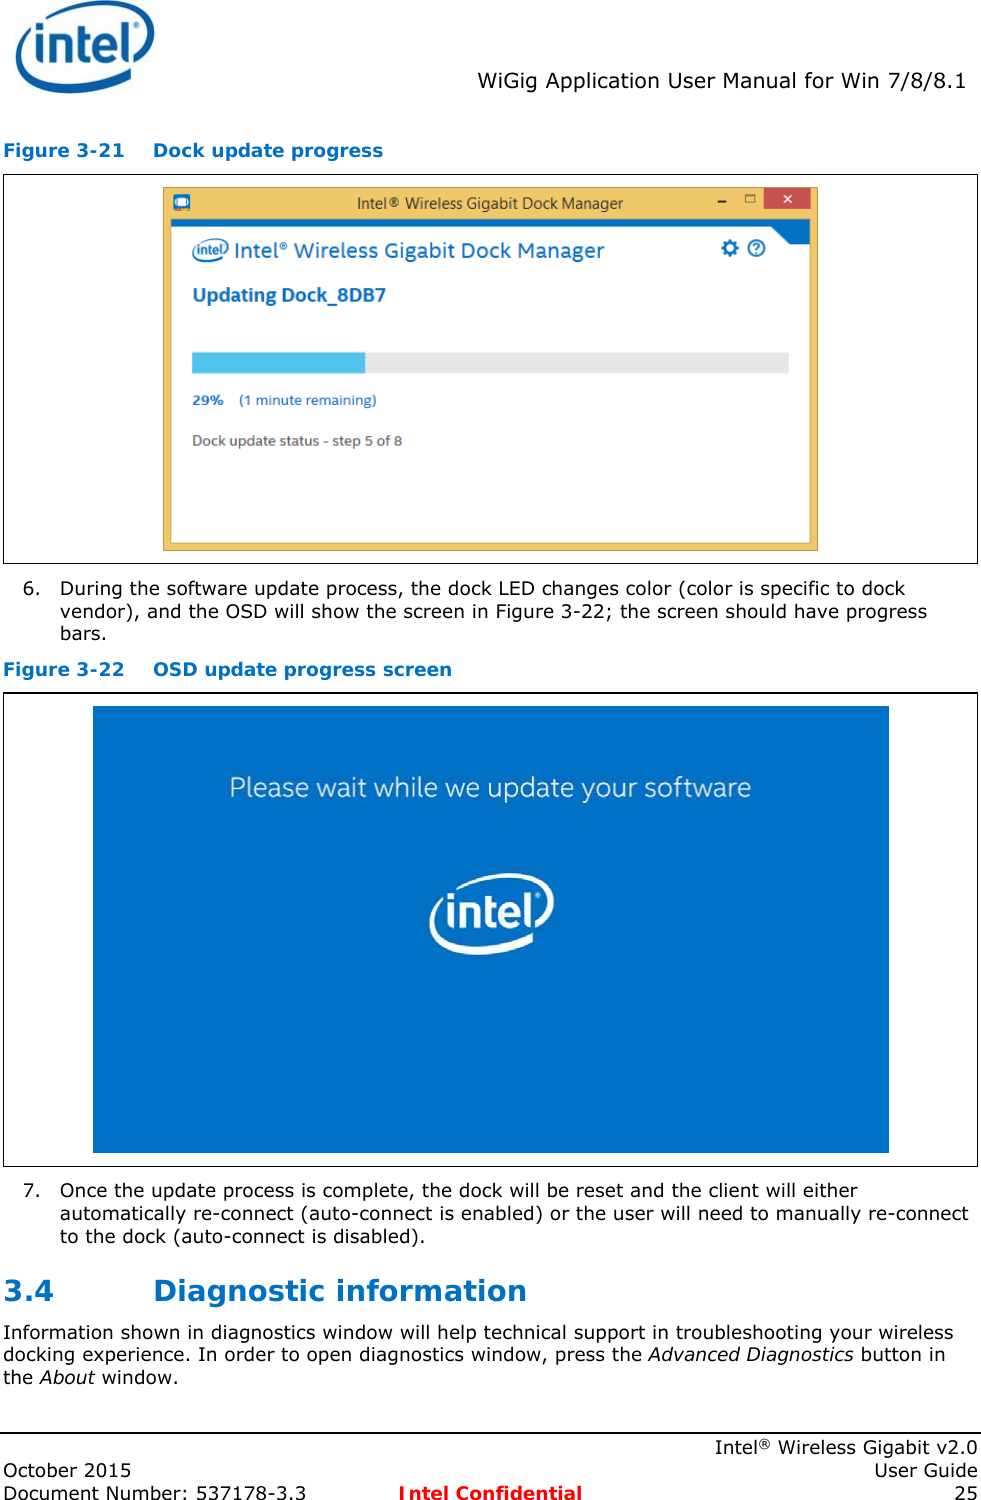  WiGig Application User Manual for Win 7/8/8.1    Intel® Wireless Gigabit v2.0 October 2015    User Guide Document Number: 537178-3.3  Intel Confidential 25 Figure 3-21  Dock update progress  6. During the software update process, the dock LED changes color (color is specific to dock vendor), and the OSD will show the screen in Figure 3-22; the screen should have progress bars. Figure 3-22  OSD update progress screen  7. Once the update process is complete, the dock will be reset and the client will either automatically re-connect (auto-connect is enabled) or the user will need to manually re-connect to the dock (auto-connect is disabled). 3.4 Diagnostic information Information shown in diagnostics window will help technical support in troubleshooting your wireless docking experience. In order to open diagnostics window, press the Advanced Diagnostics button in the About window.  